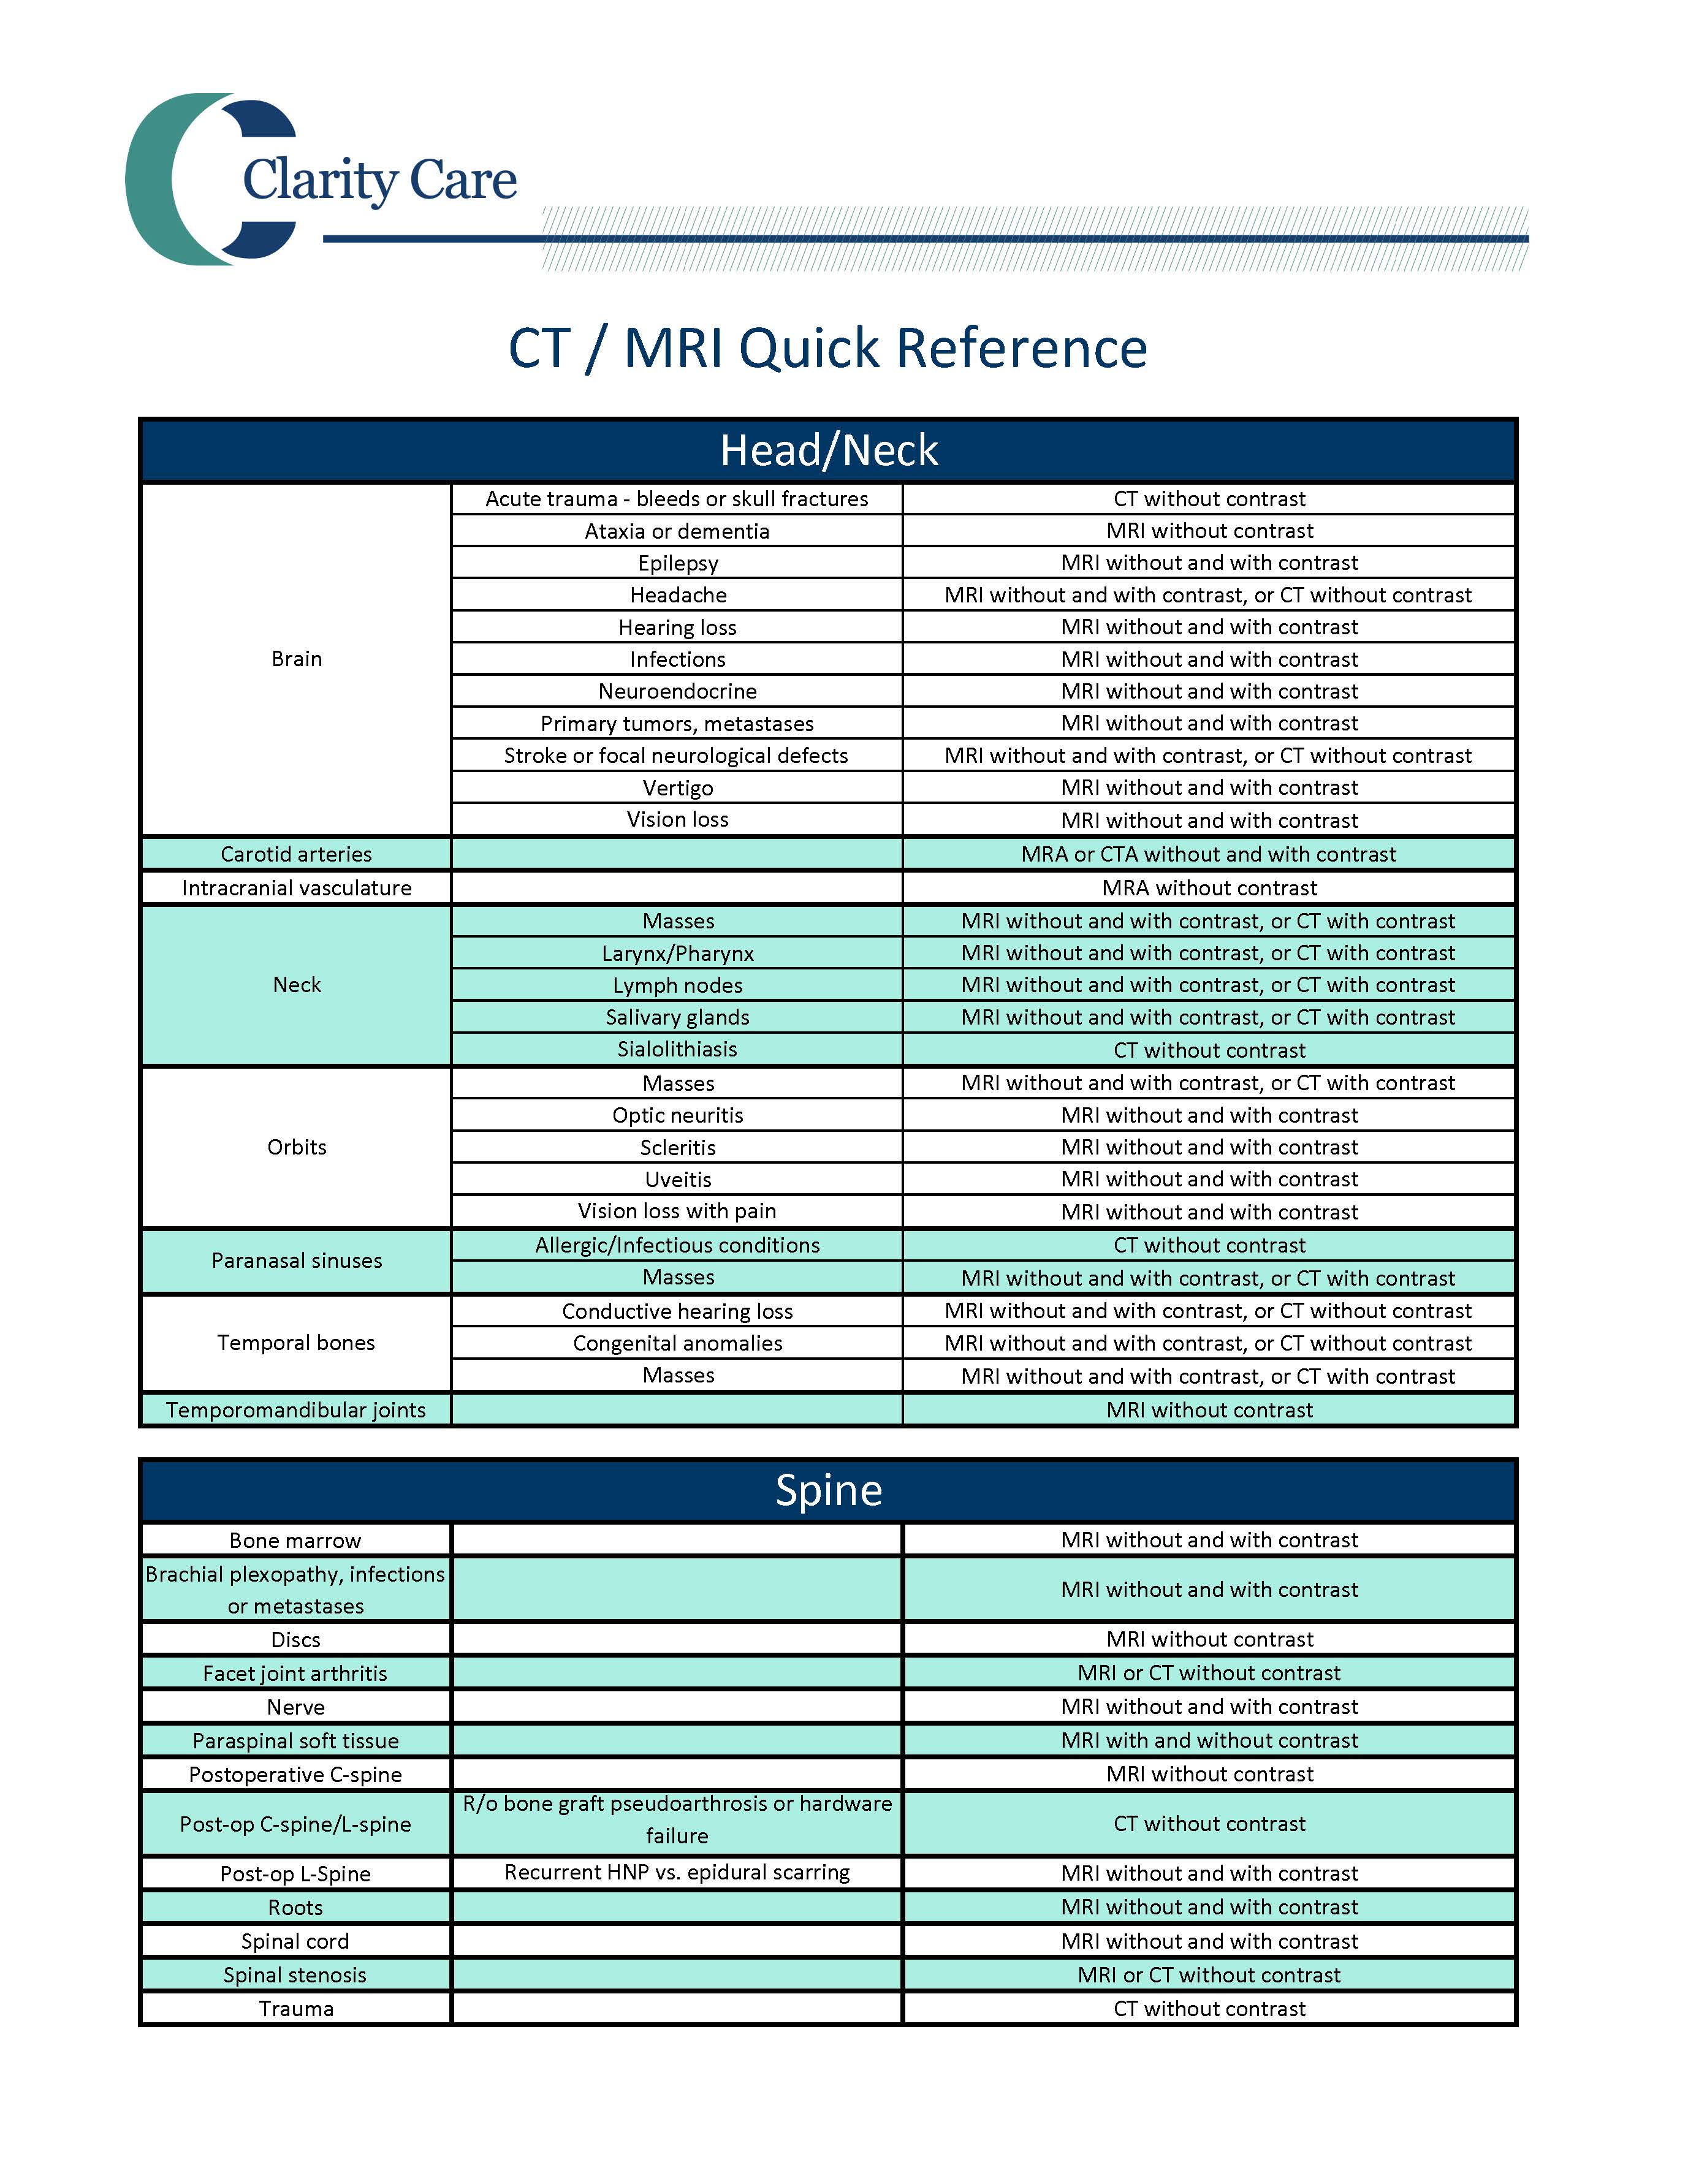 CT & MRI Quick Reference Guide